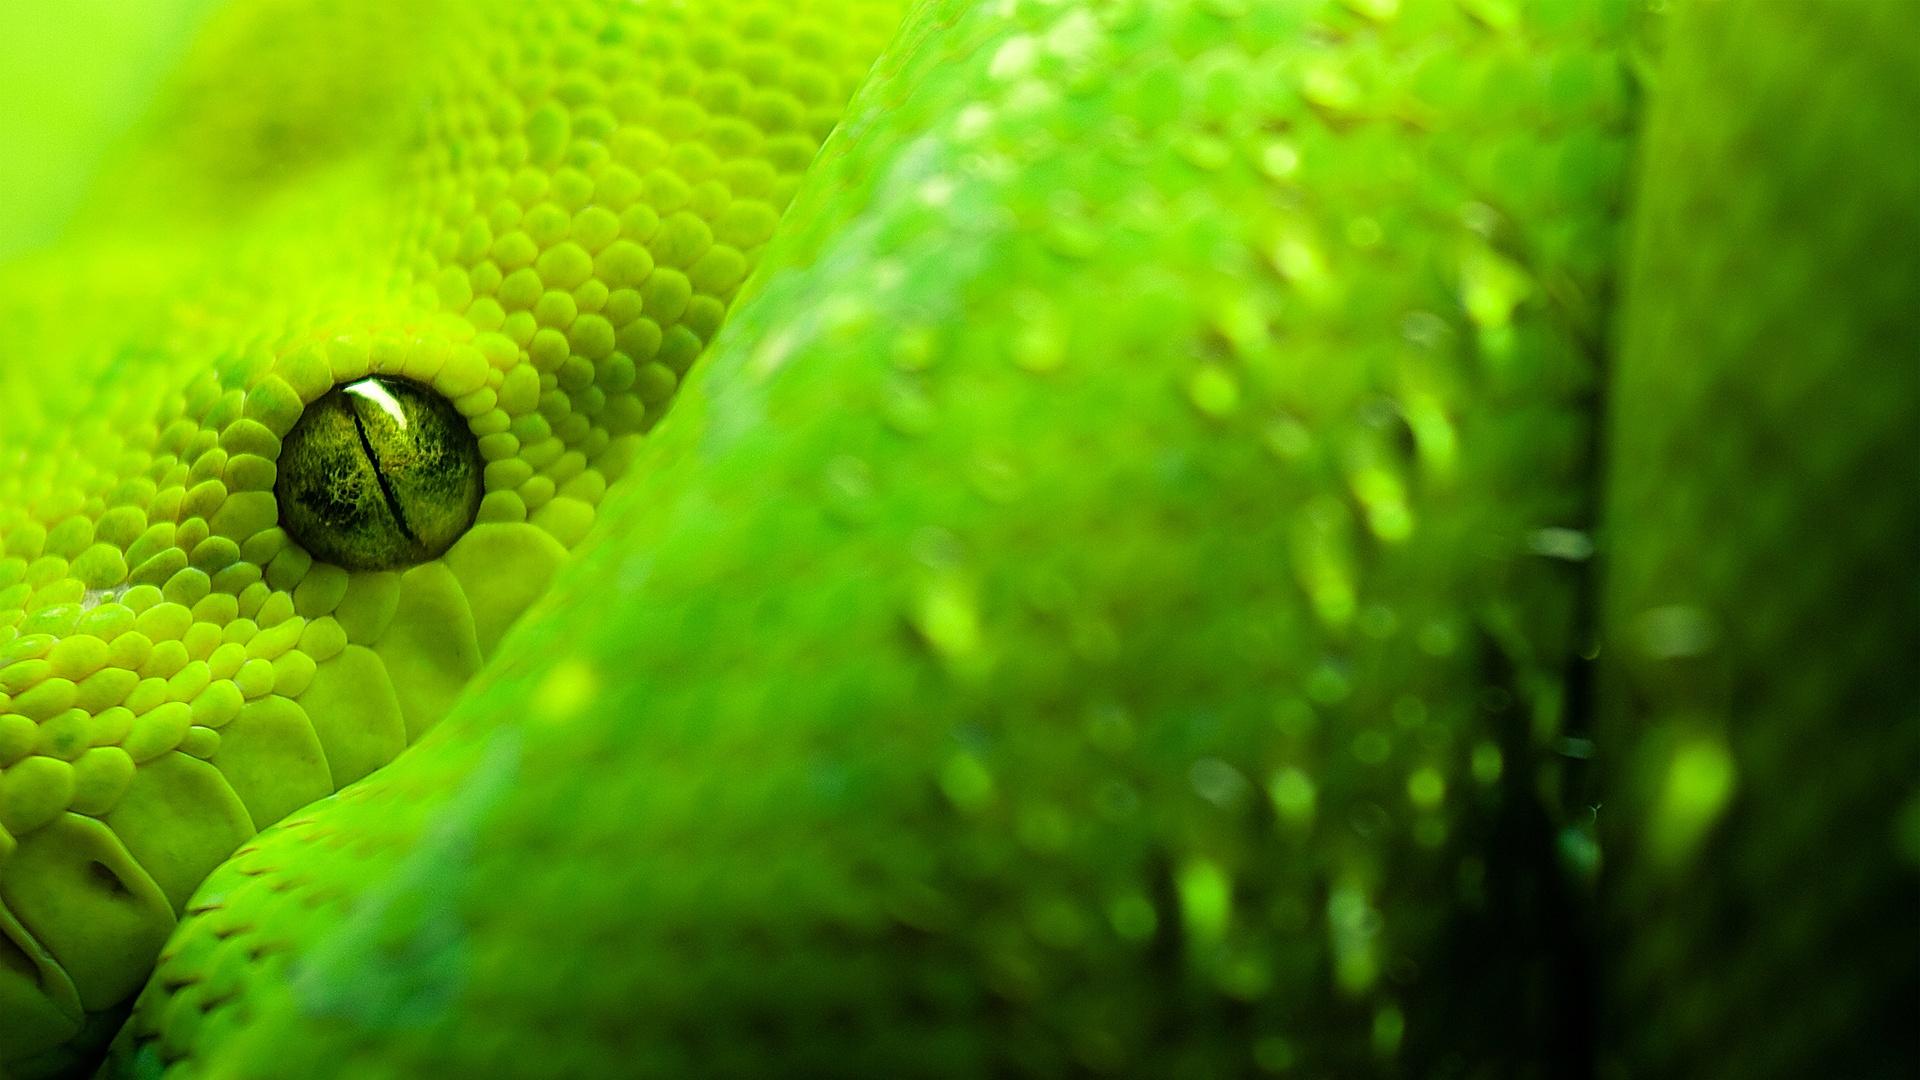 Free download Green Viper Snake Wallpaper Image amp Picture